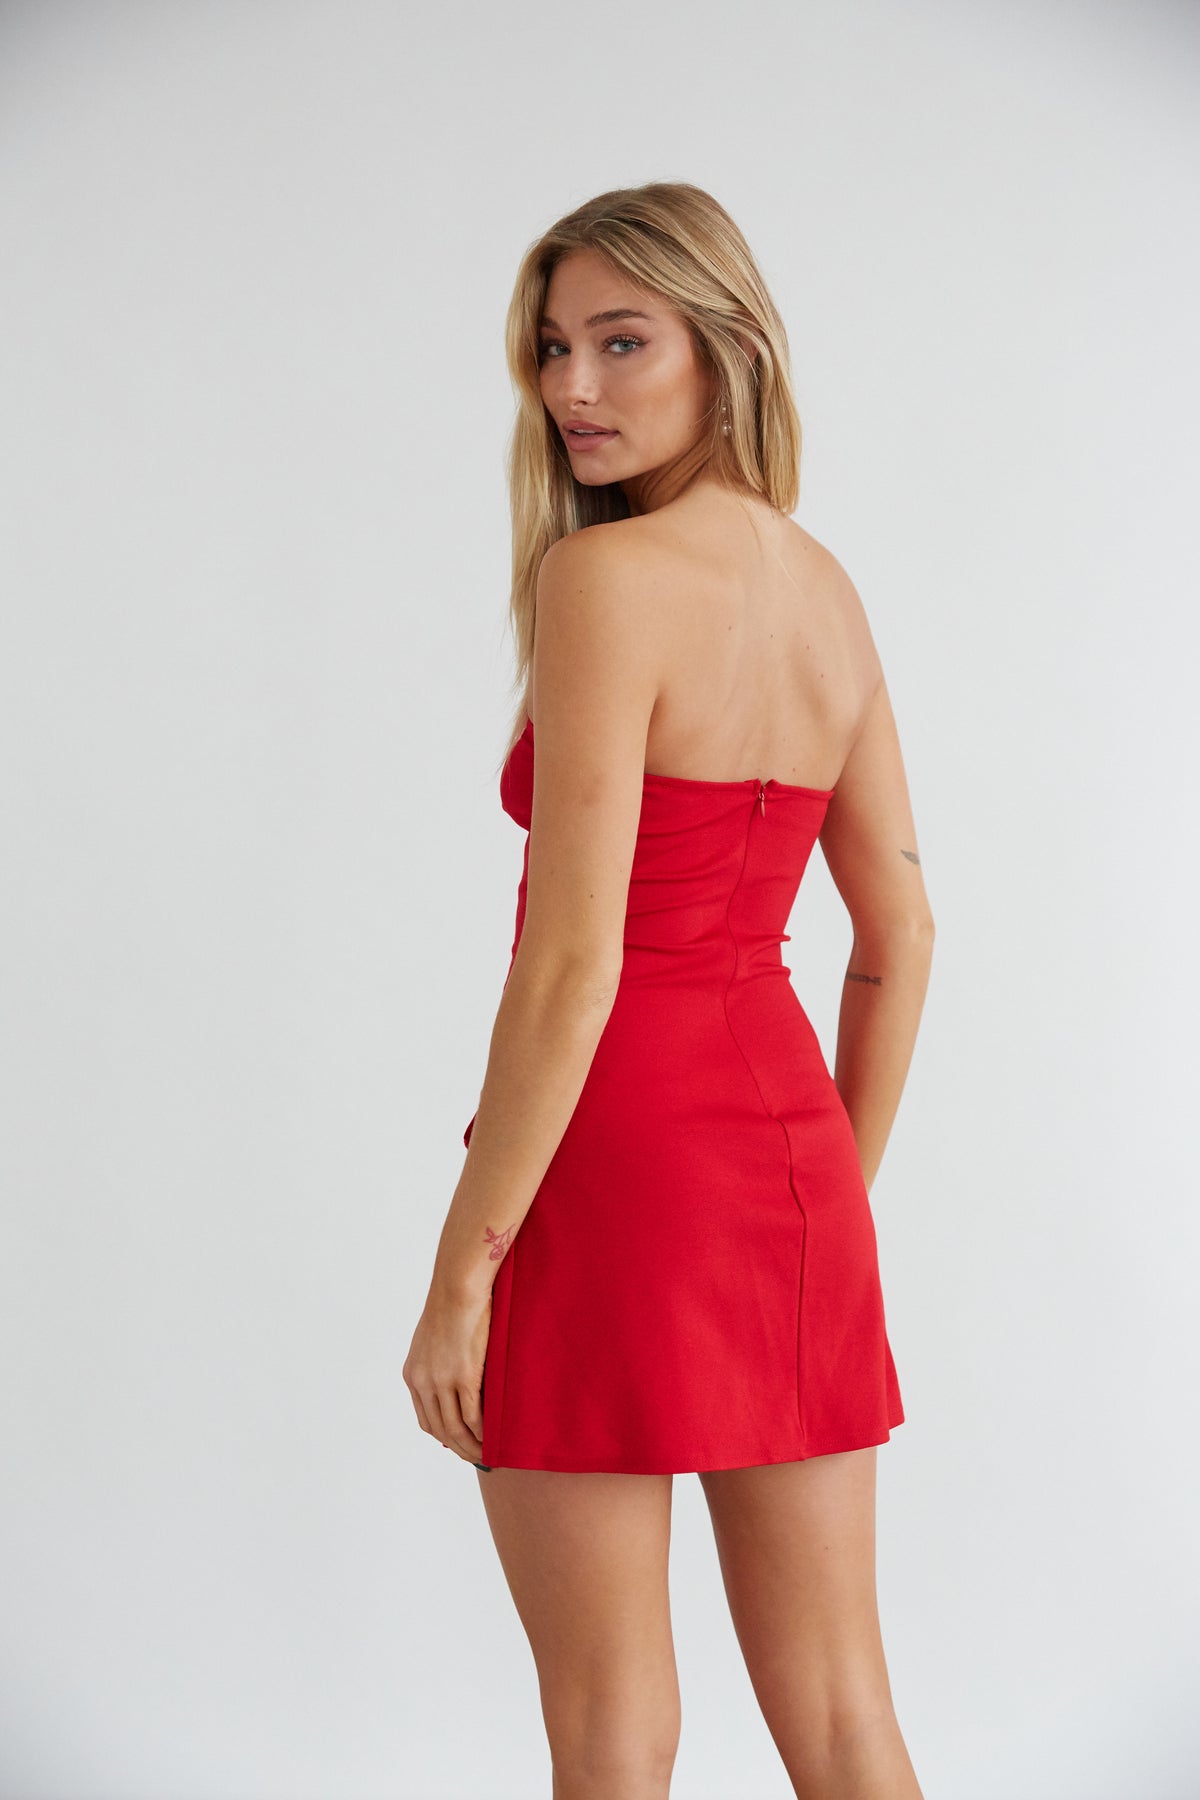 hot red mini dress - strapless bodycon dress with faux pockets - date night outfit inspo - devil halloween costume - sexy mini dress - valentines day outfit inspo